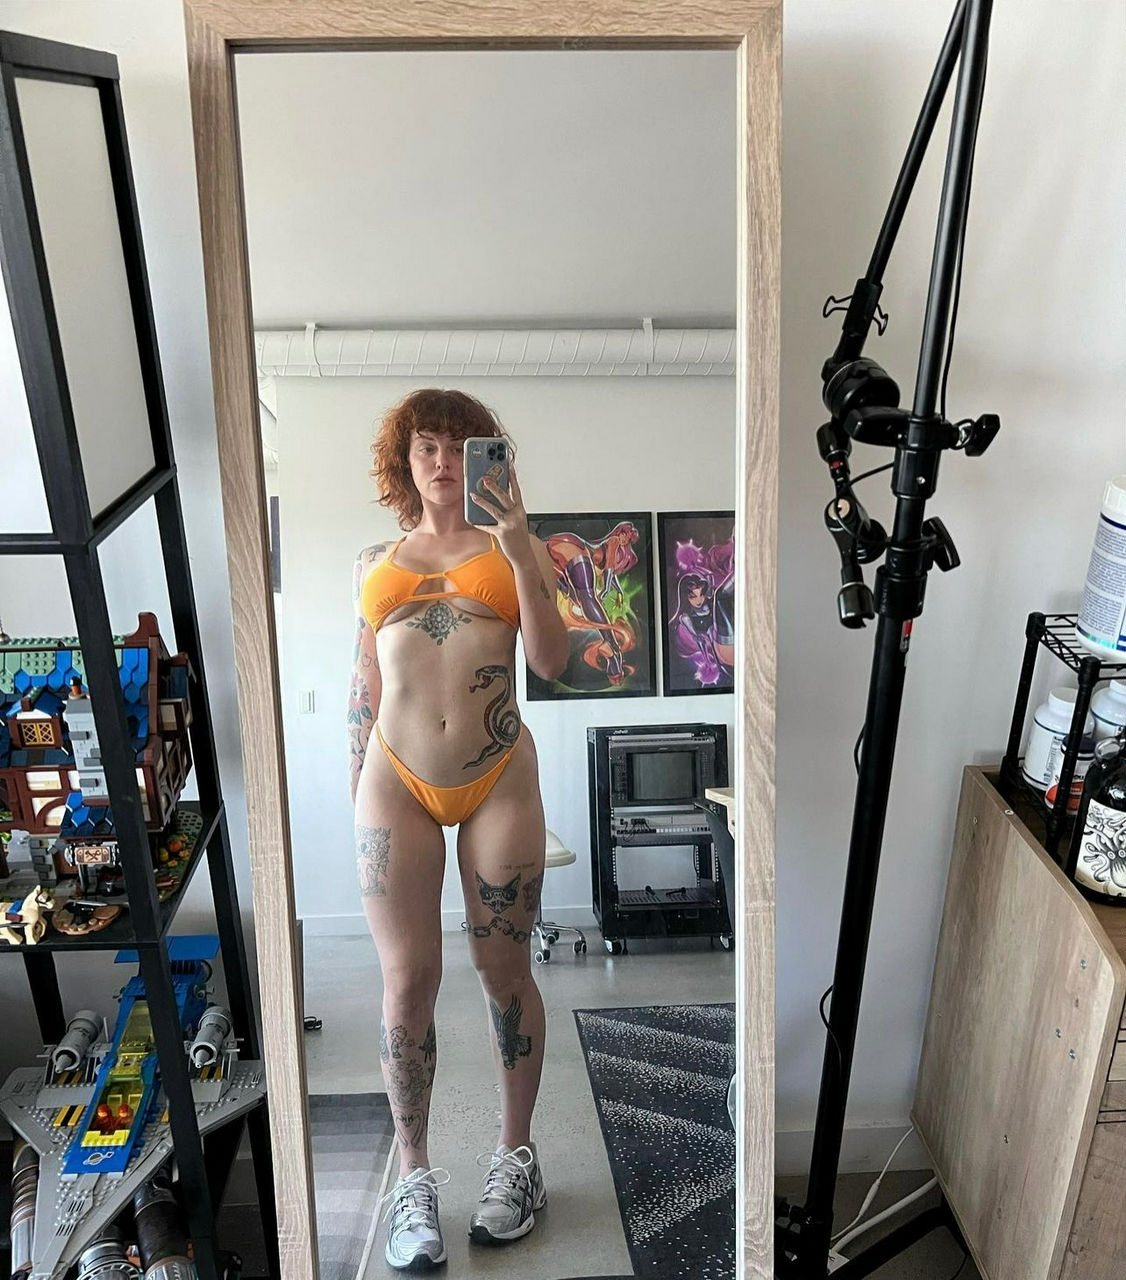 Down to fuck Hello! I’m doli and I’m here to help you explore your body intimately and passionately while escaping ev...